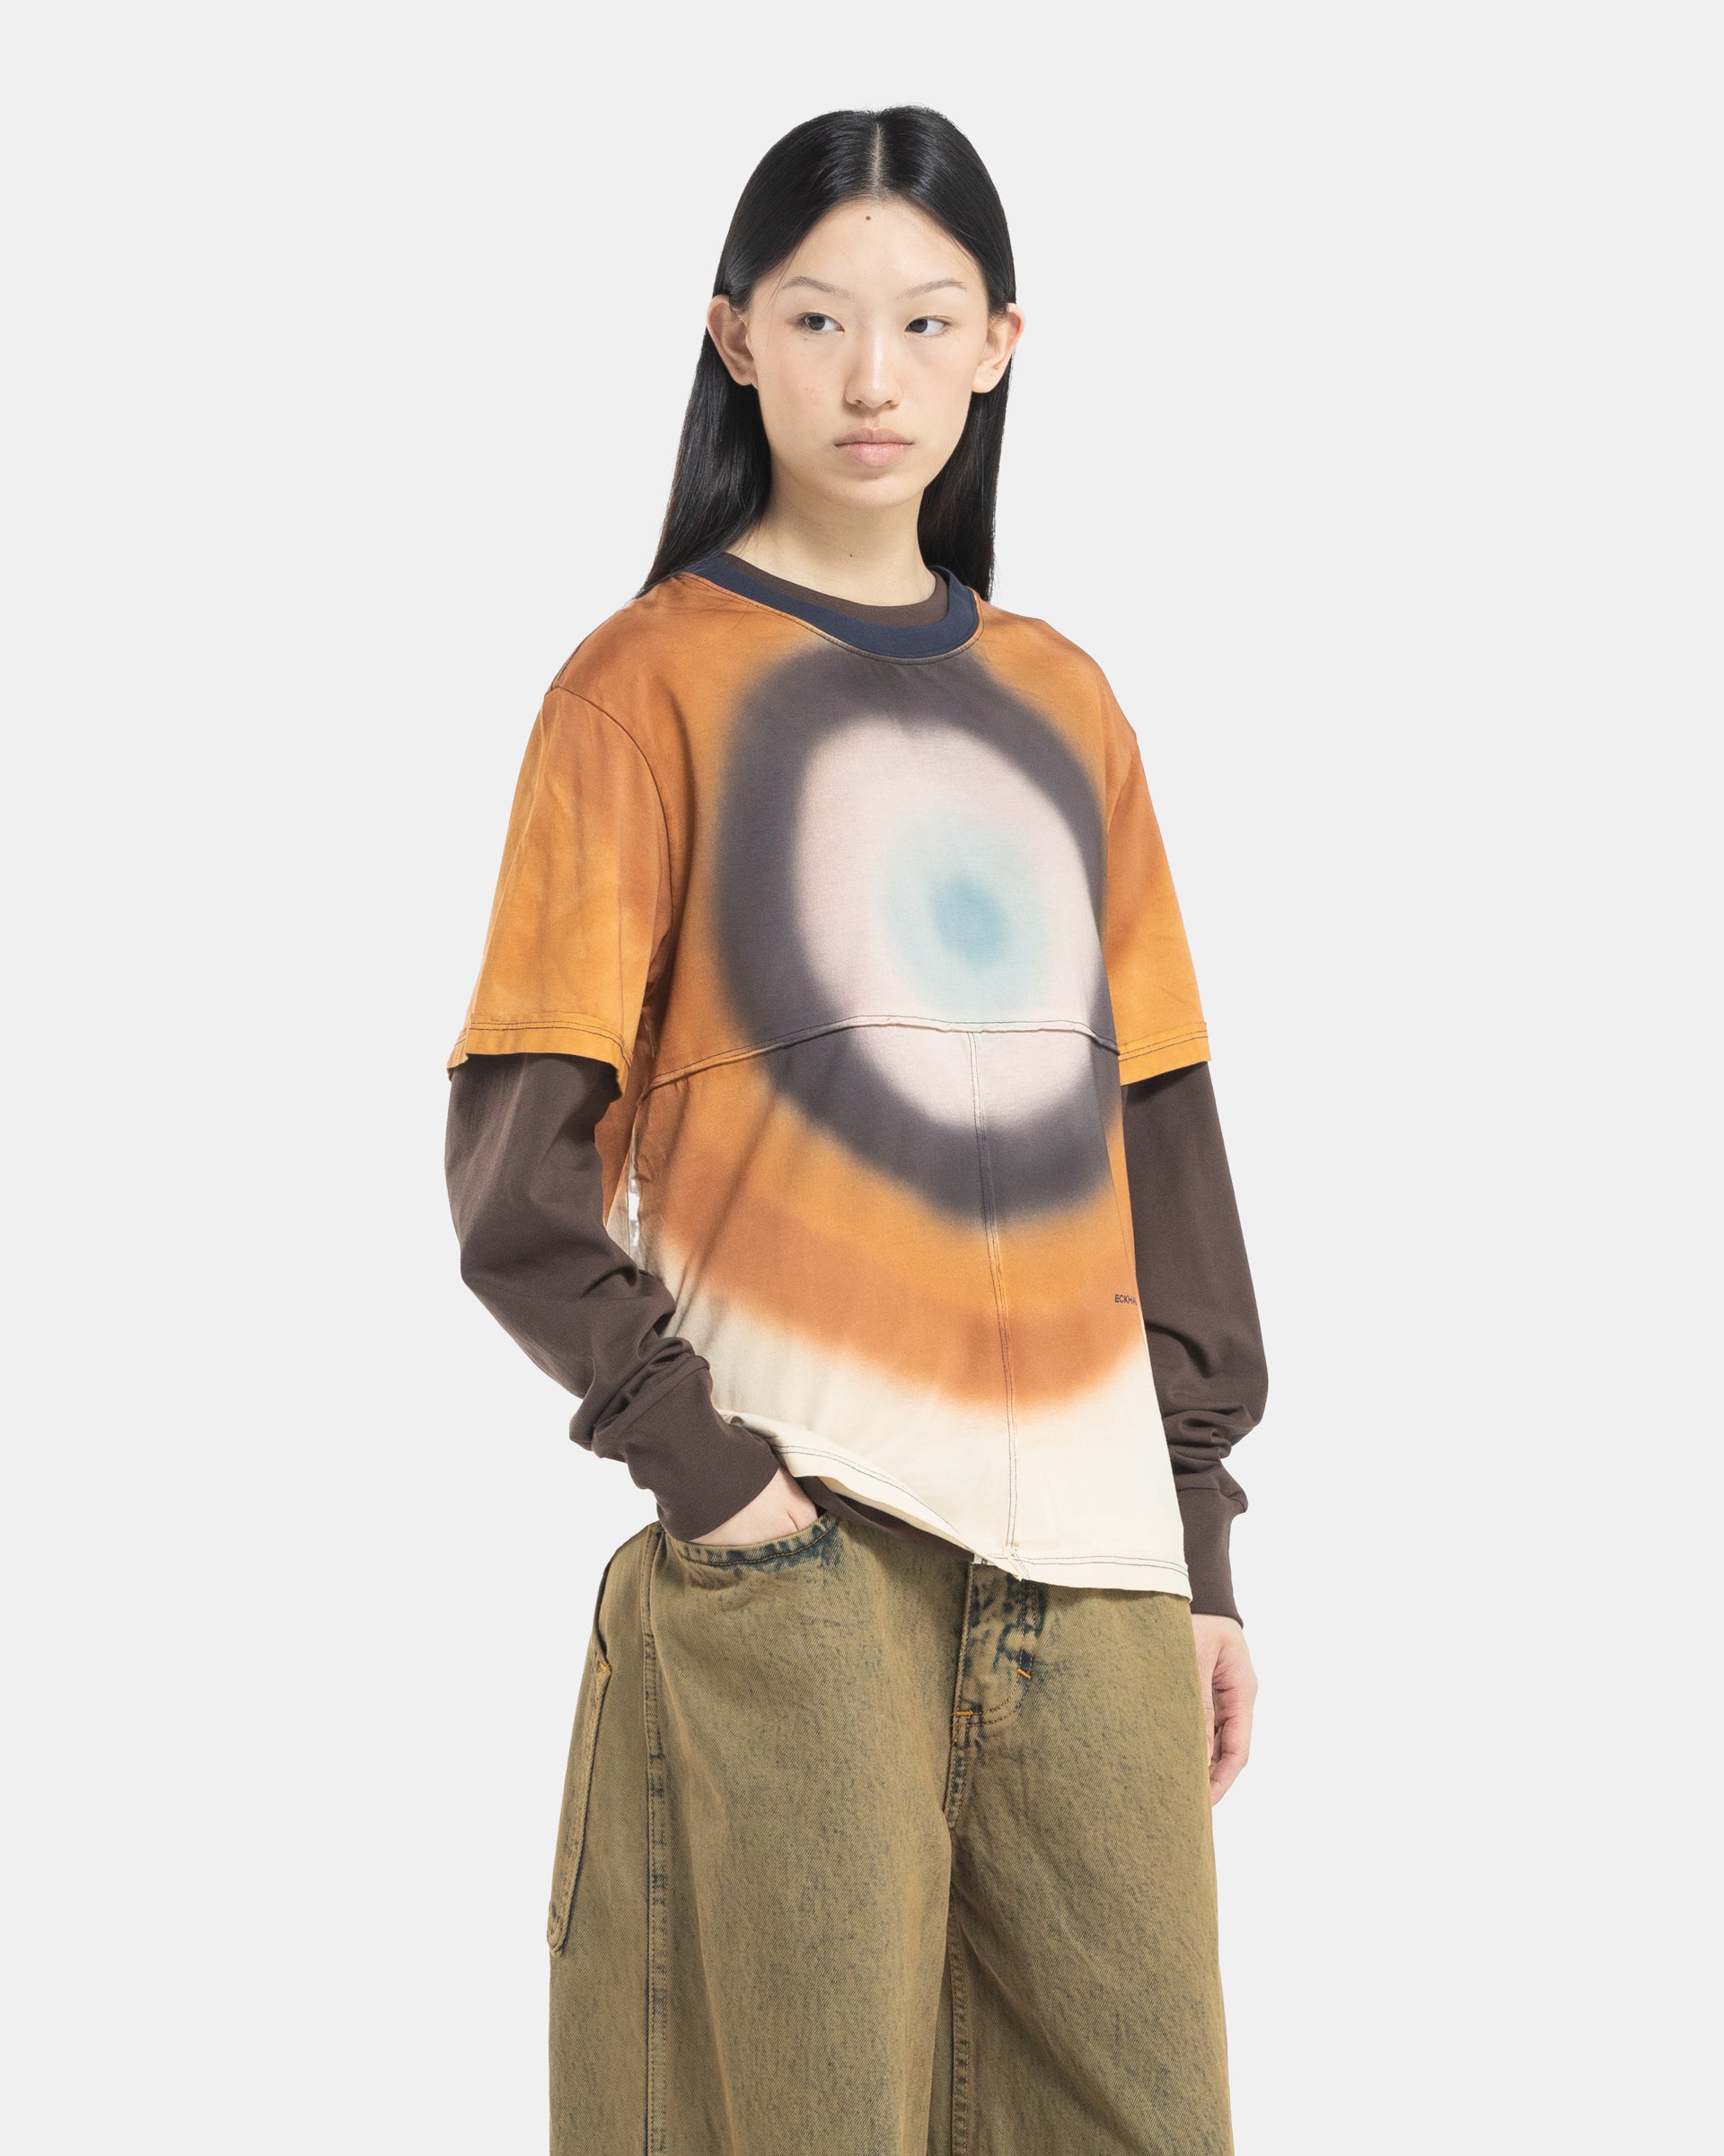 Female Model wearing the Eckhaus Latta Lapped Designer T-Shirt with a printed design